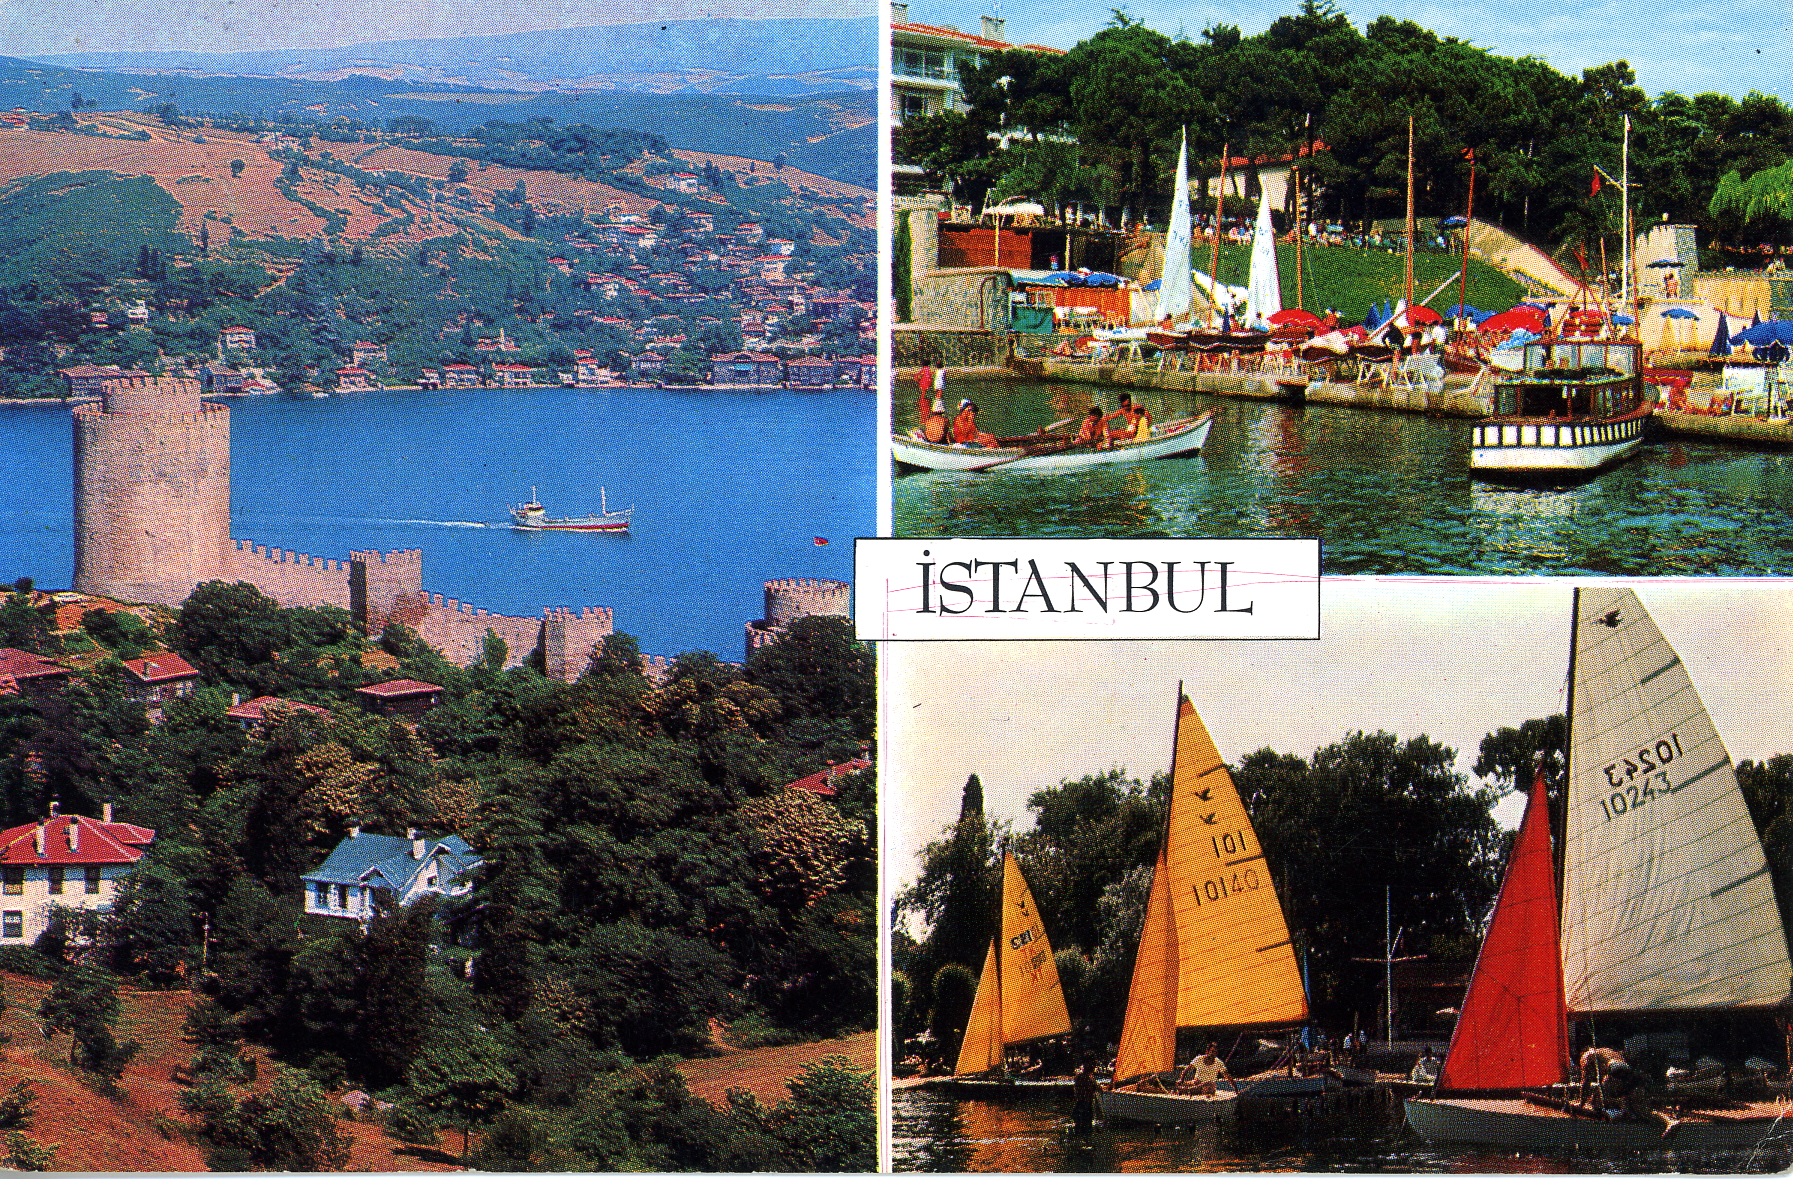 Postcard from Istanbul Image